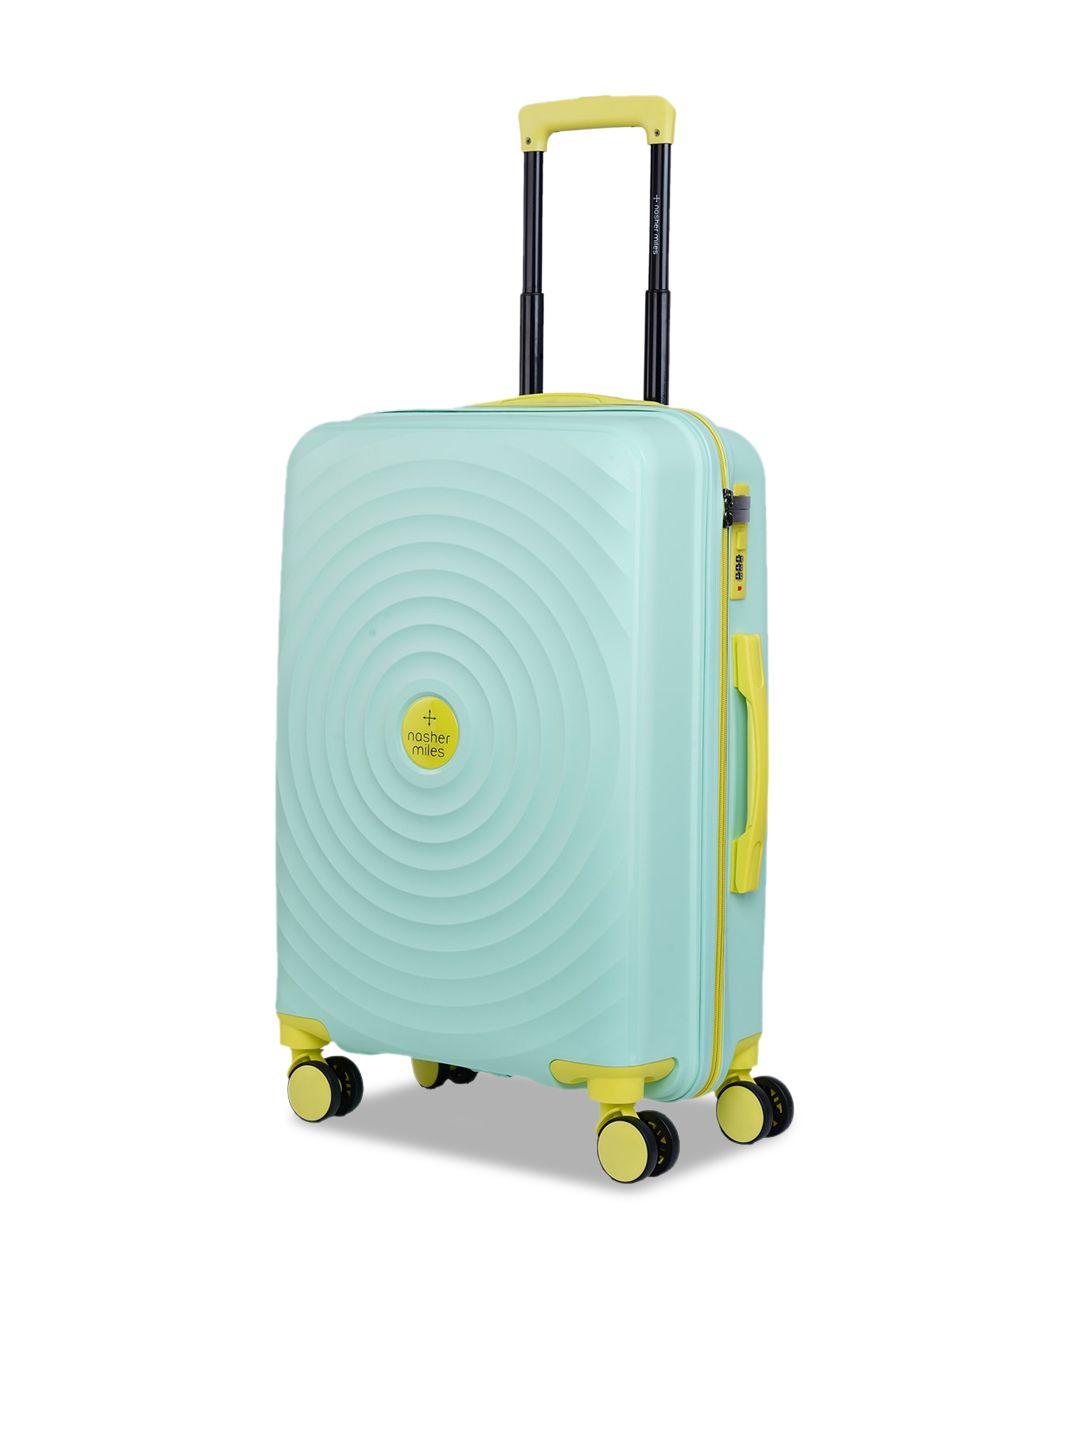 nasher miles green & lime green solid hard-sided mediumtrolley suitcase